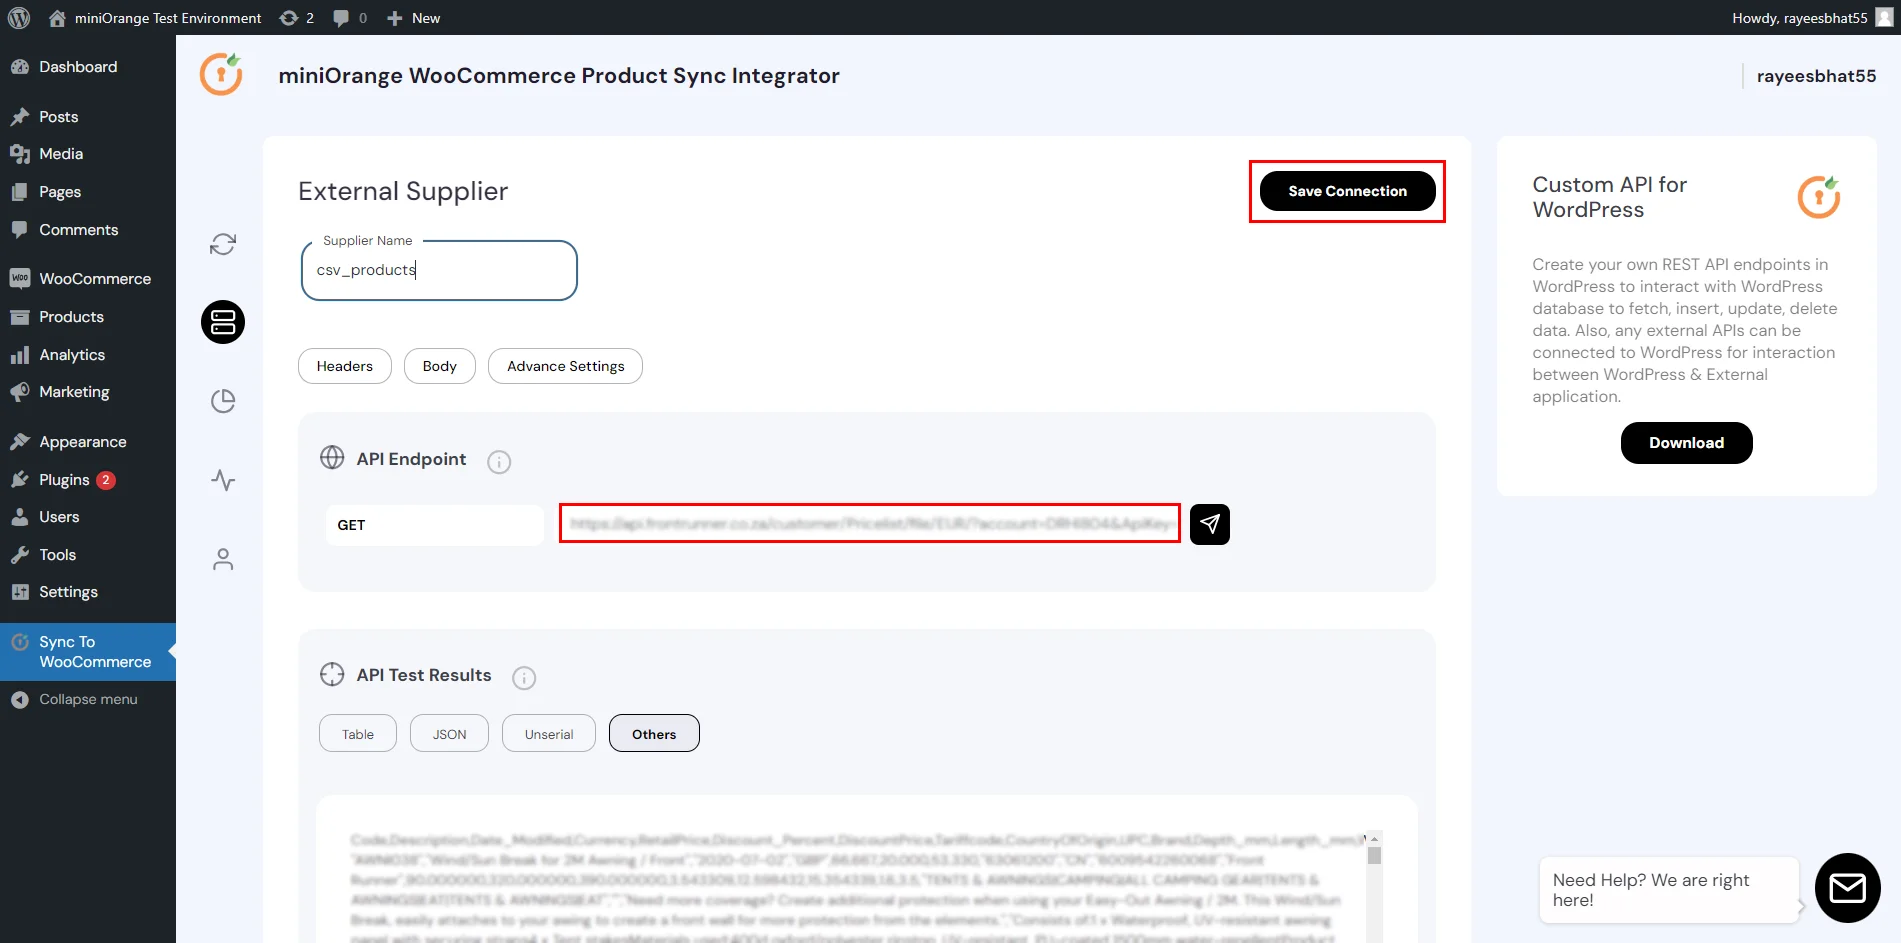 Configure WooCommerce Product Sync - Fill in the Supplier Name, CSV file